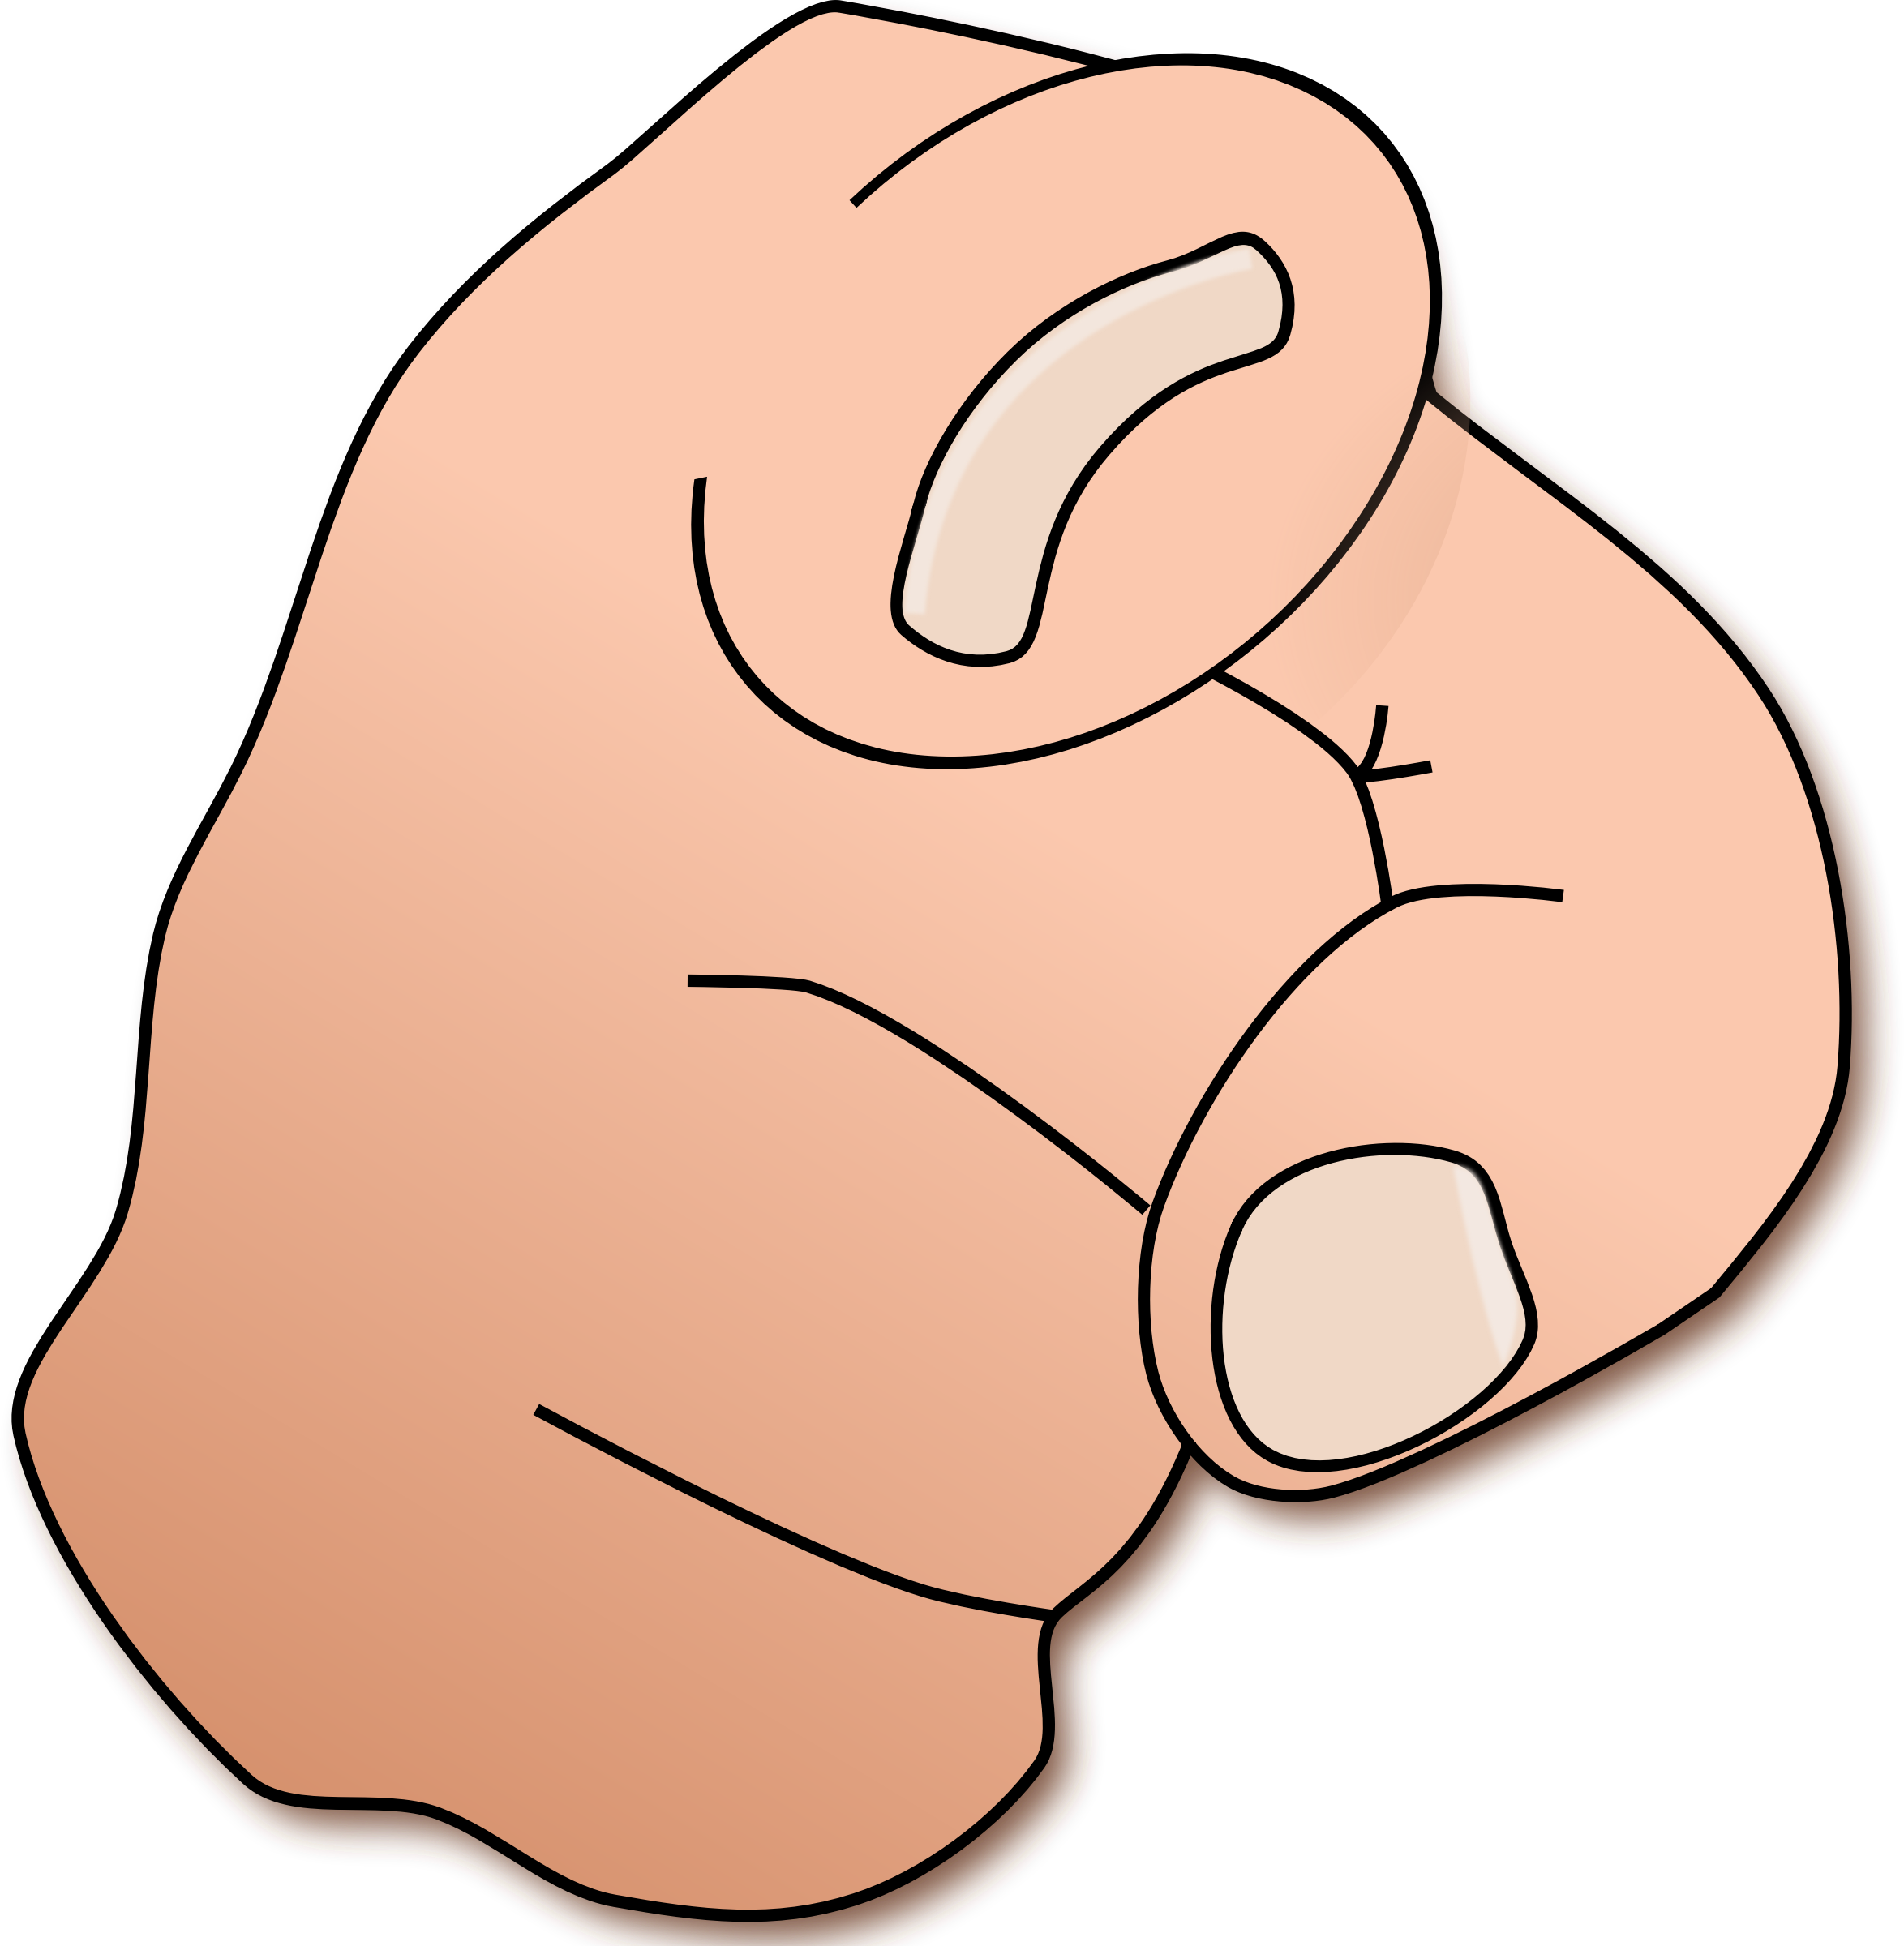 Finger Pointing At You PNG Image